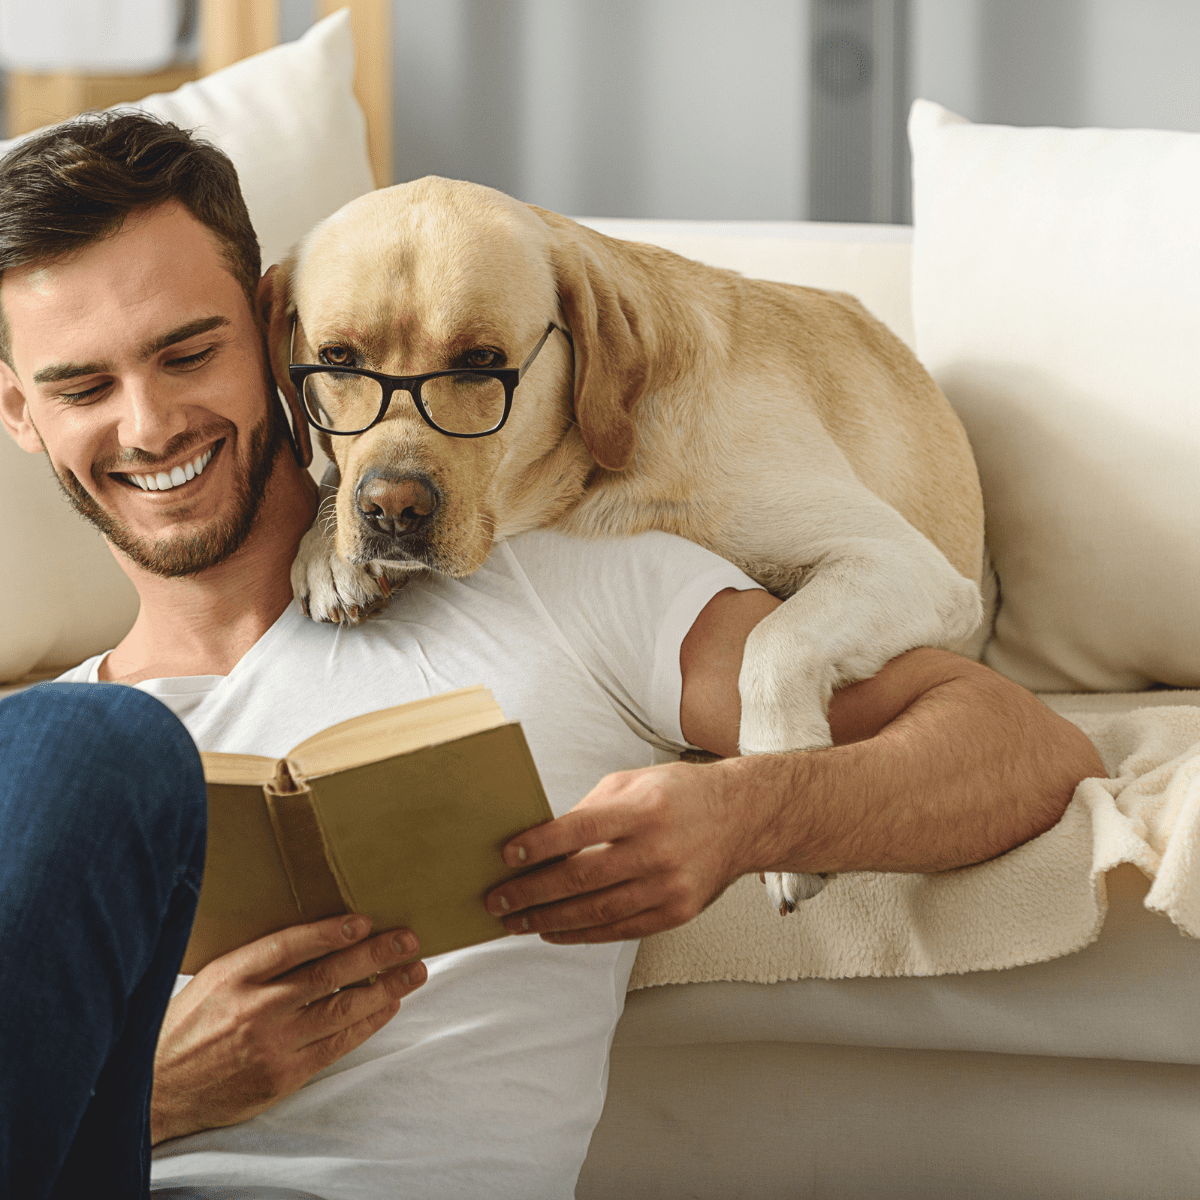 Dog reading with glasses